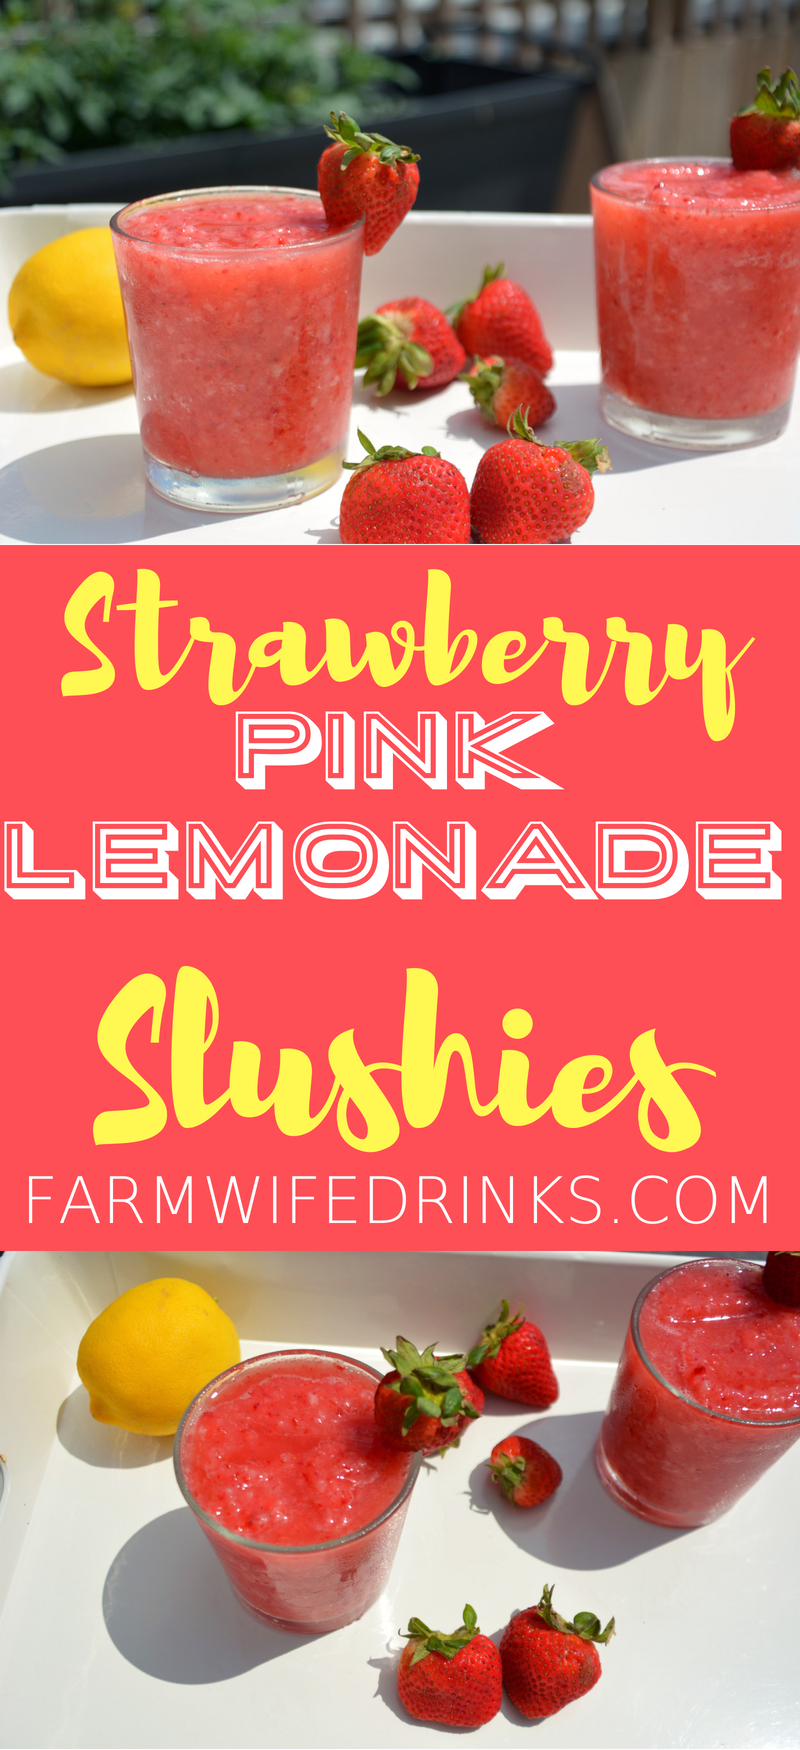 Strawberry Pink Lemonade Slushies combine frozen strawberries with pink lemonade to make a great, refreshing frozen mocktail for the kids and adults to enjoy all day long.